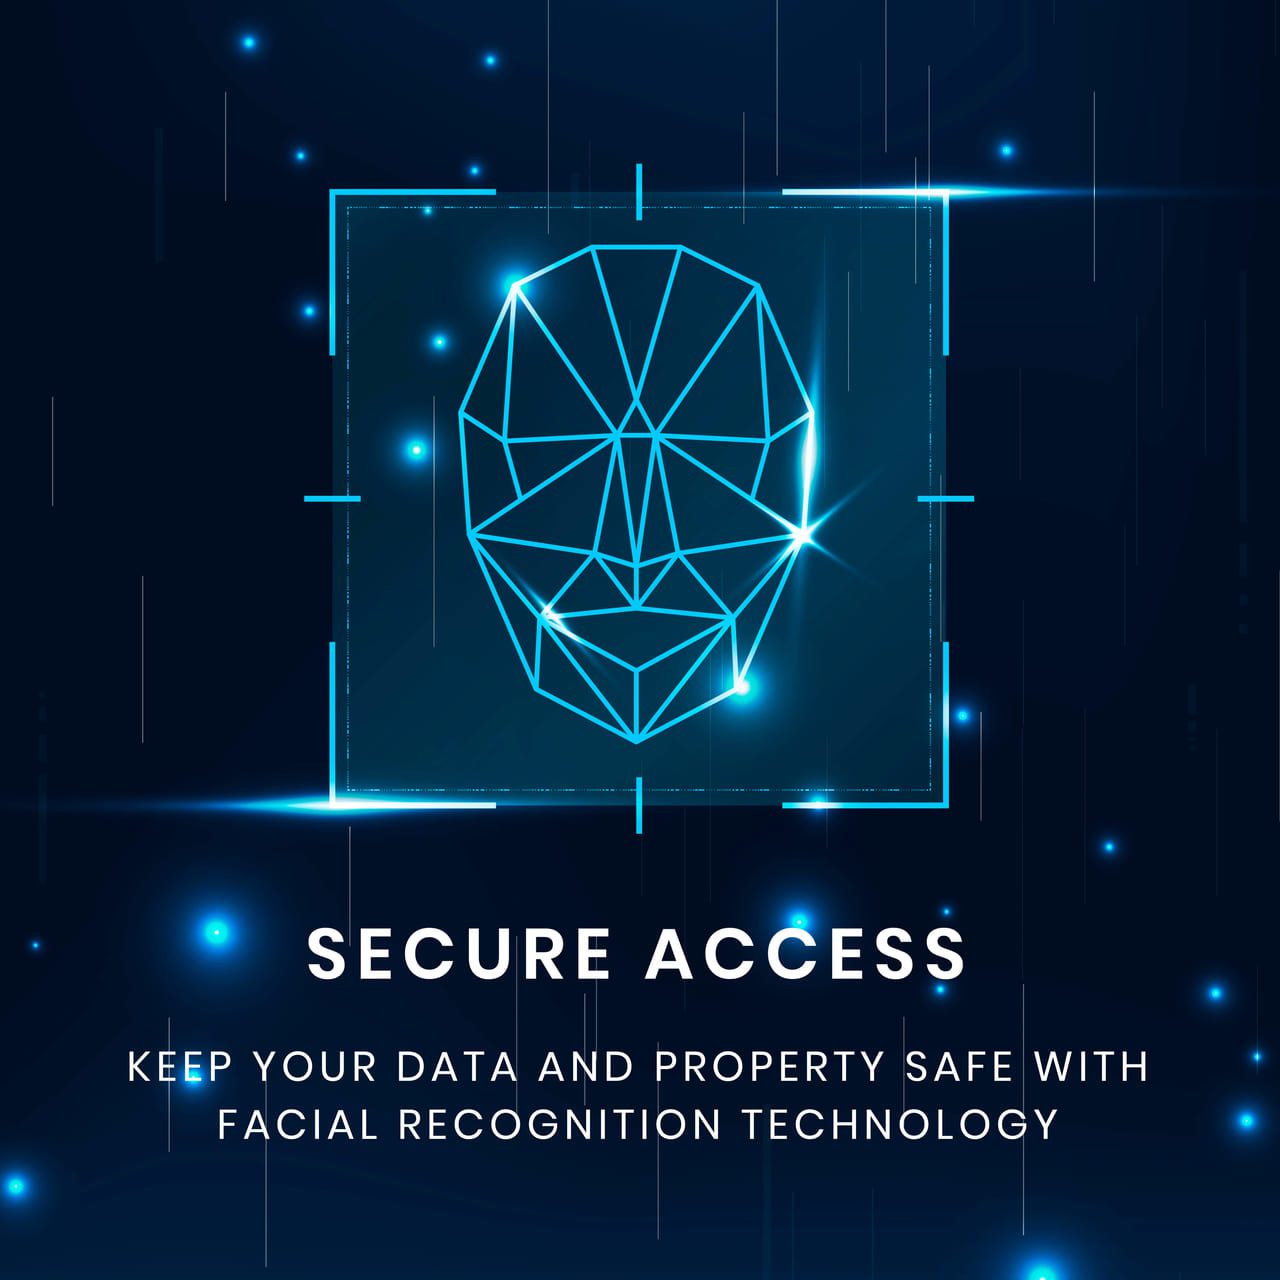 Face Recognition is a popular type of biometric technology